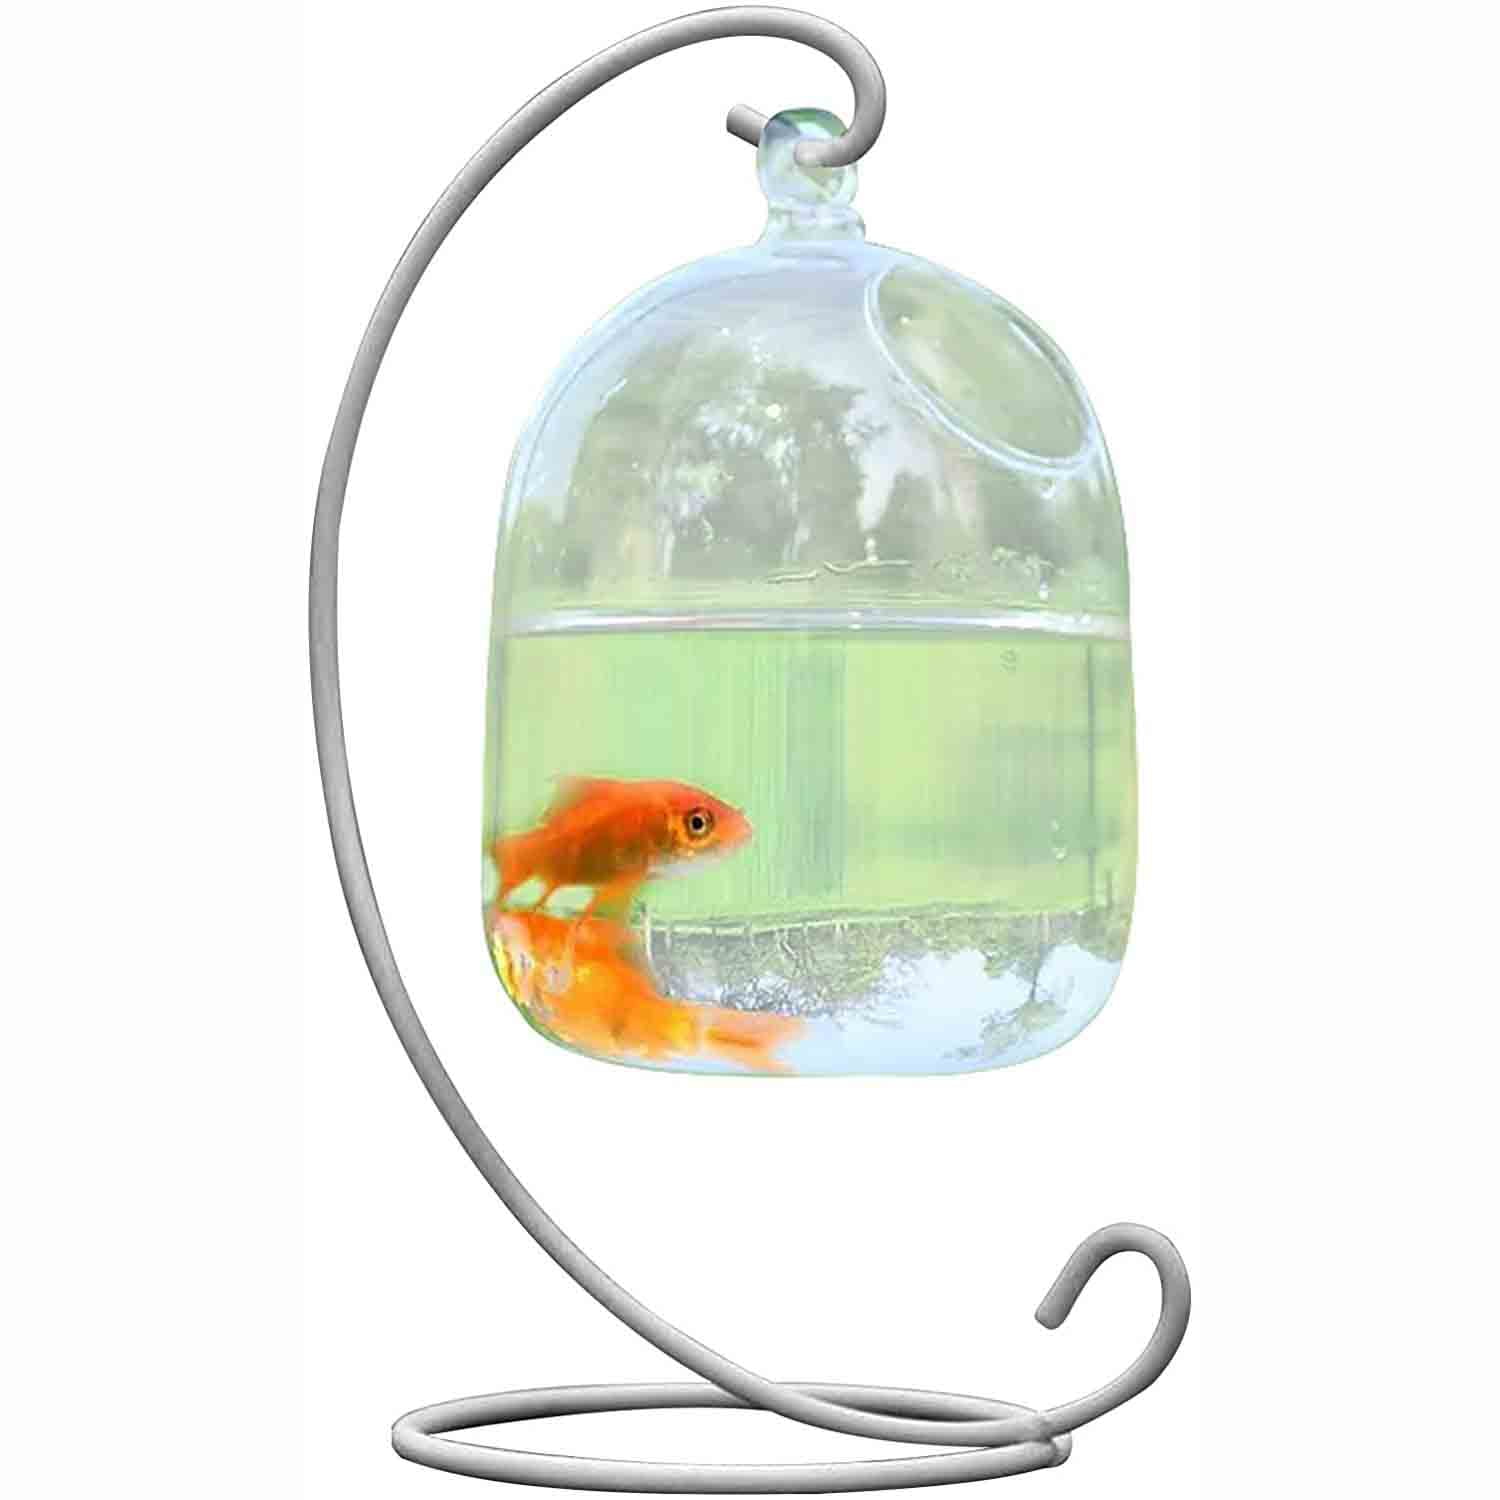 Yirtree Desk Hanging Fish Tank, Small Glass Betta Bowl Aquarium with  Stand,Plant Terrarium for Home Table Top Office Garden Decor